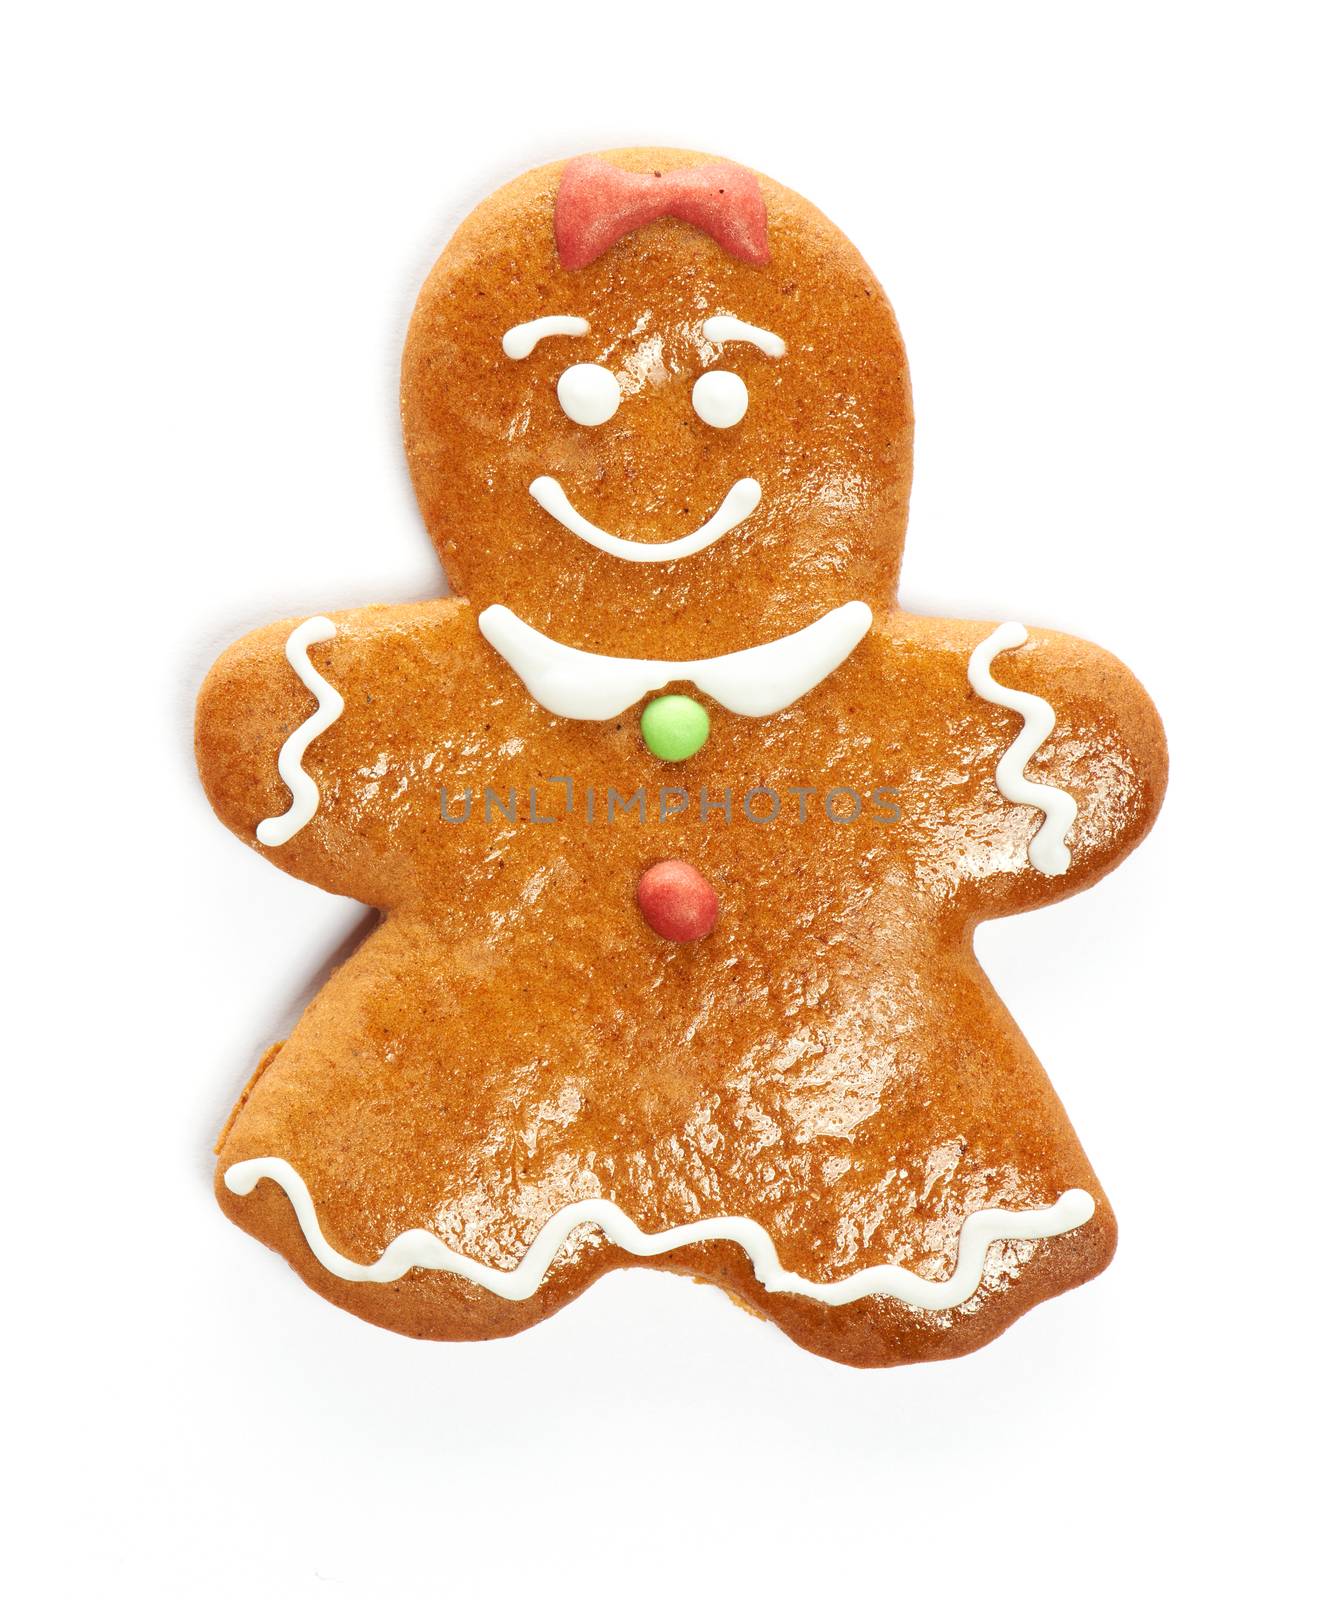 Christmas gingerbread girl cookie isolated on white